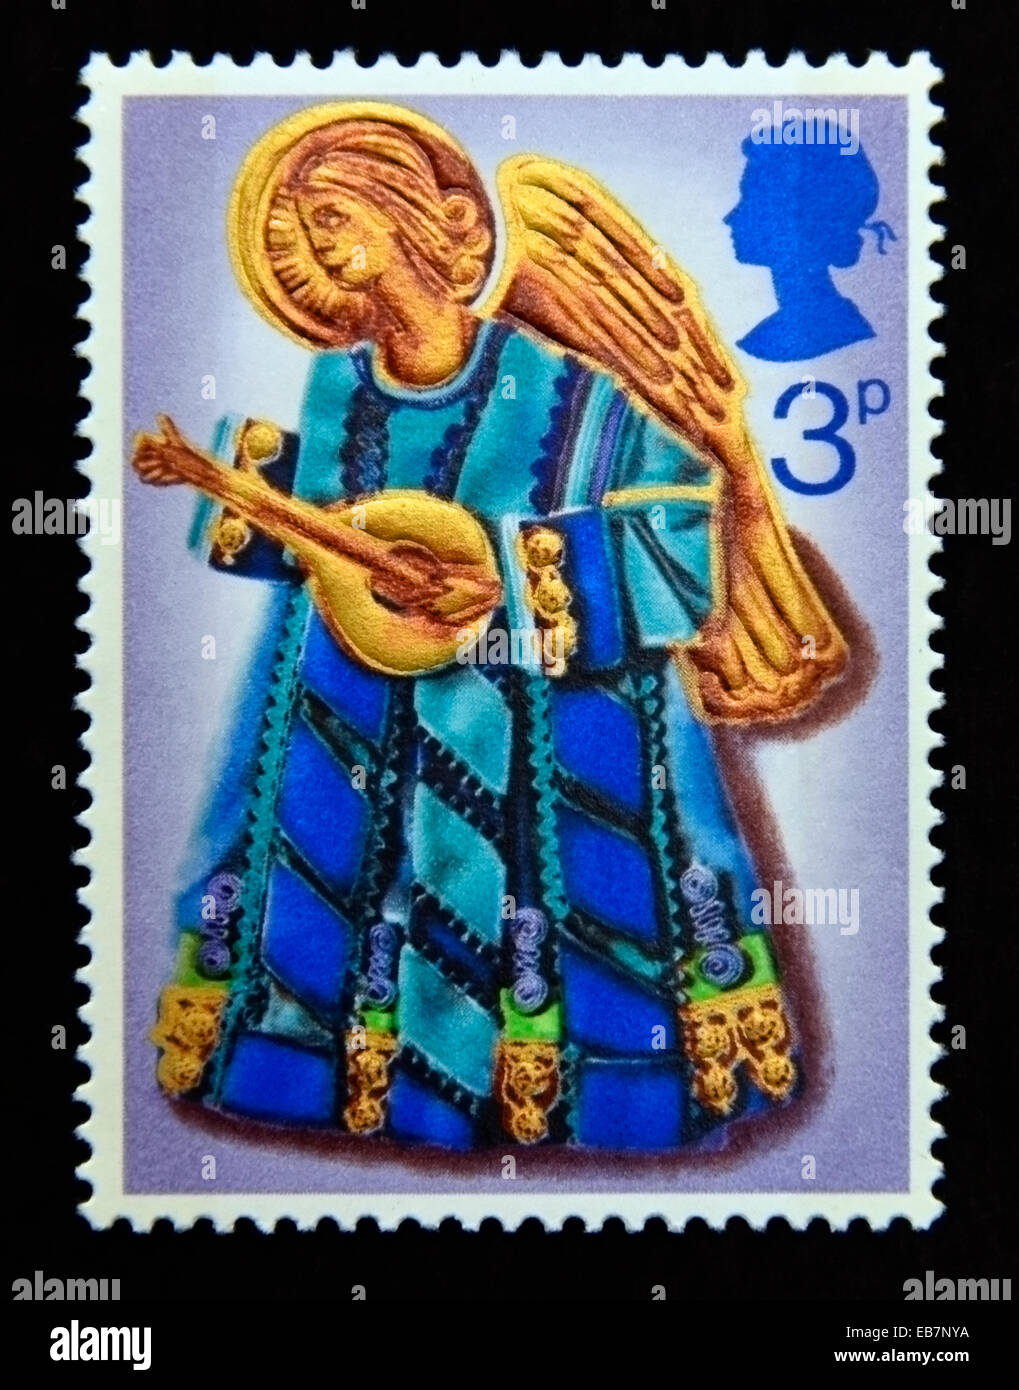 Postage stamp. Great Britain. Queen Elizabeth II. Christmas 1972. Angel playing Lute. 3p. Stock Photo